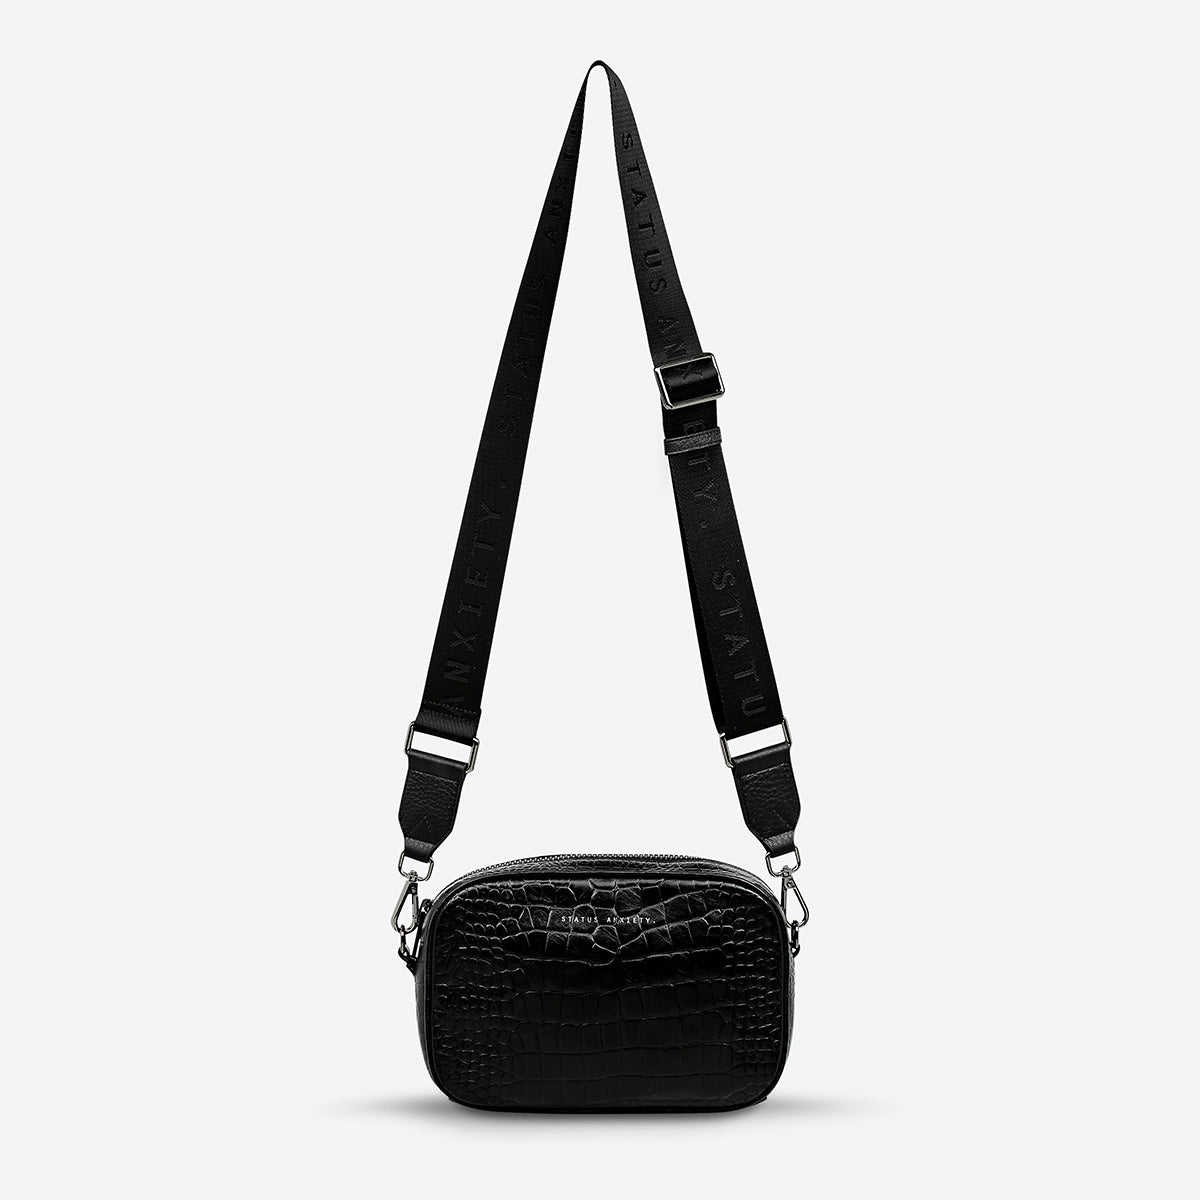 status-anxiety-bag-plunder-without-you-strap-black-croc-front-hanging.jpg